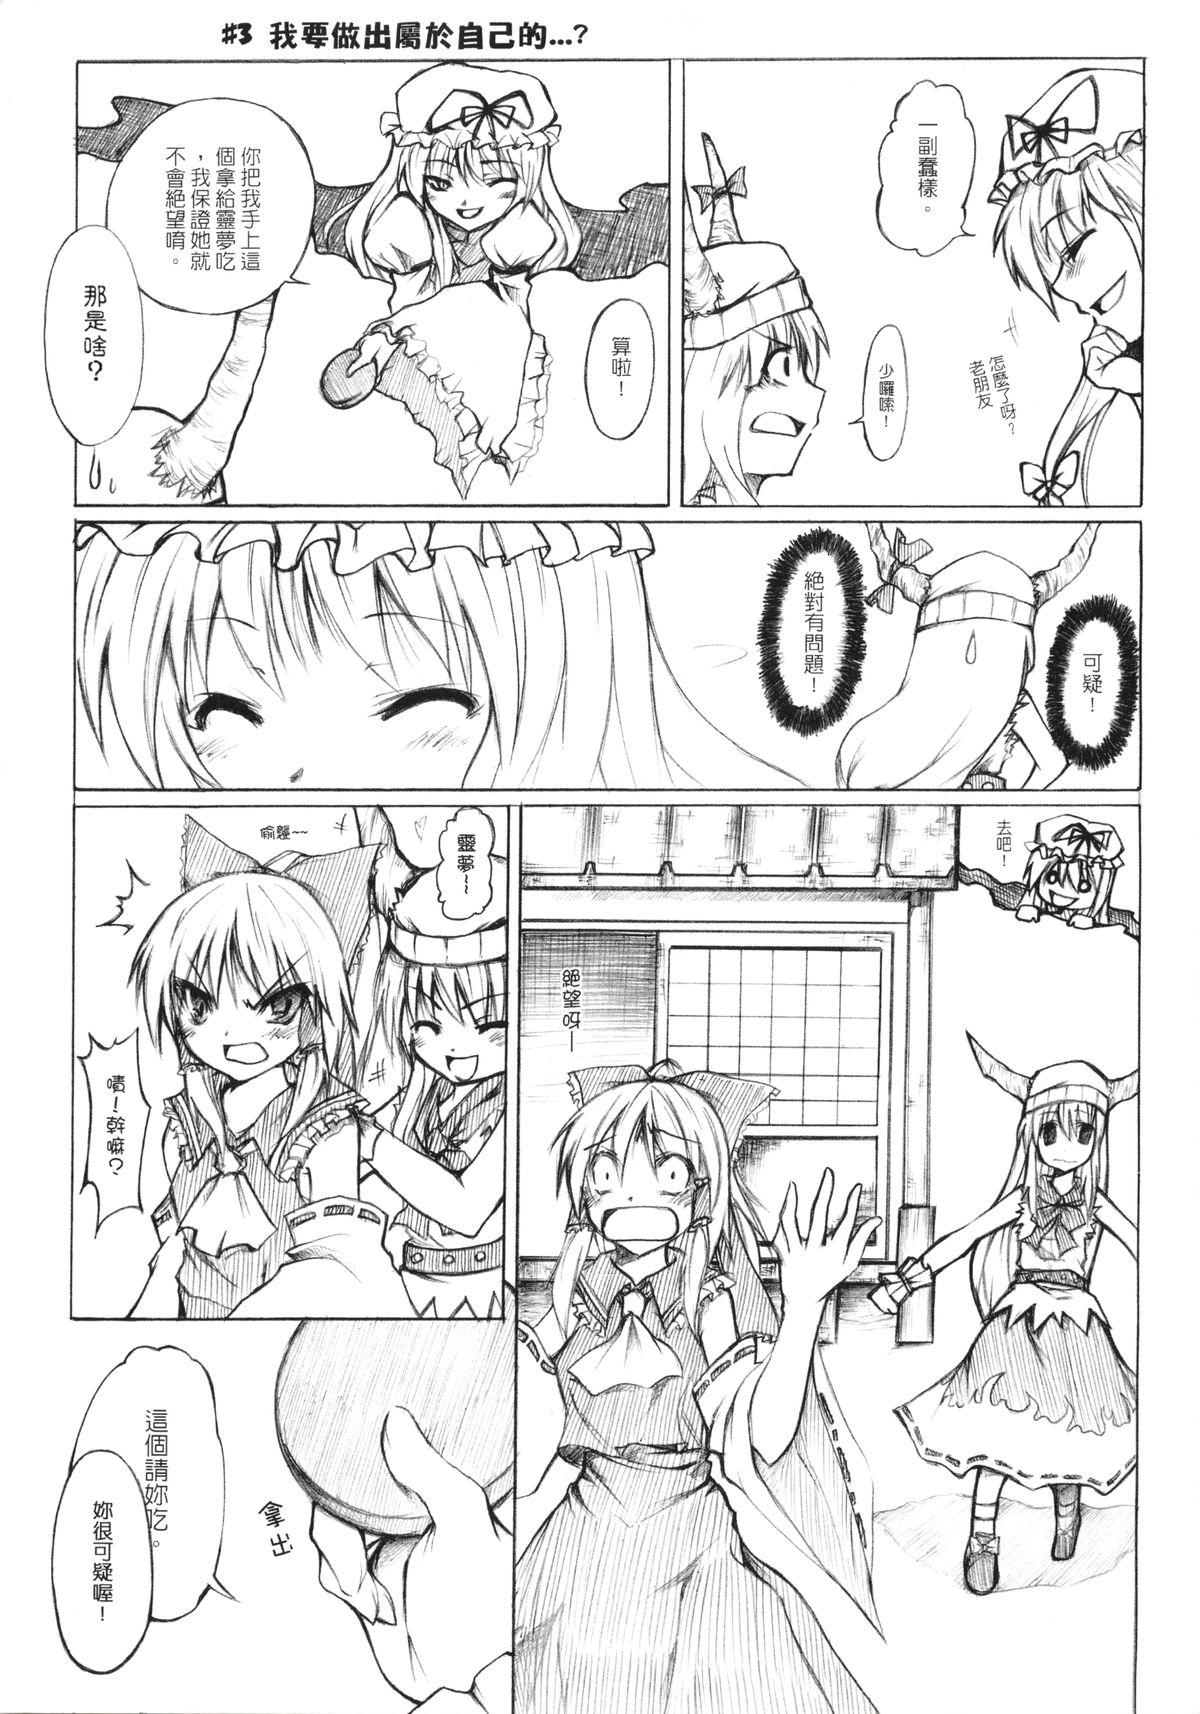 Clit 紫隙間Die! - Touhou project People Having Sex - Page 11